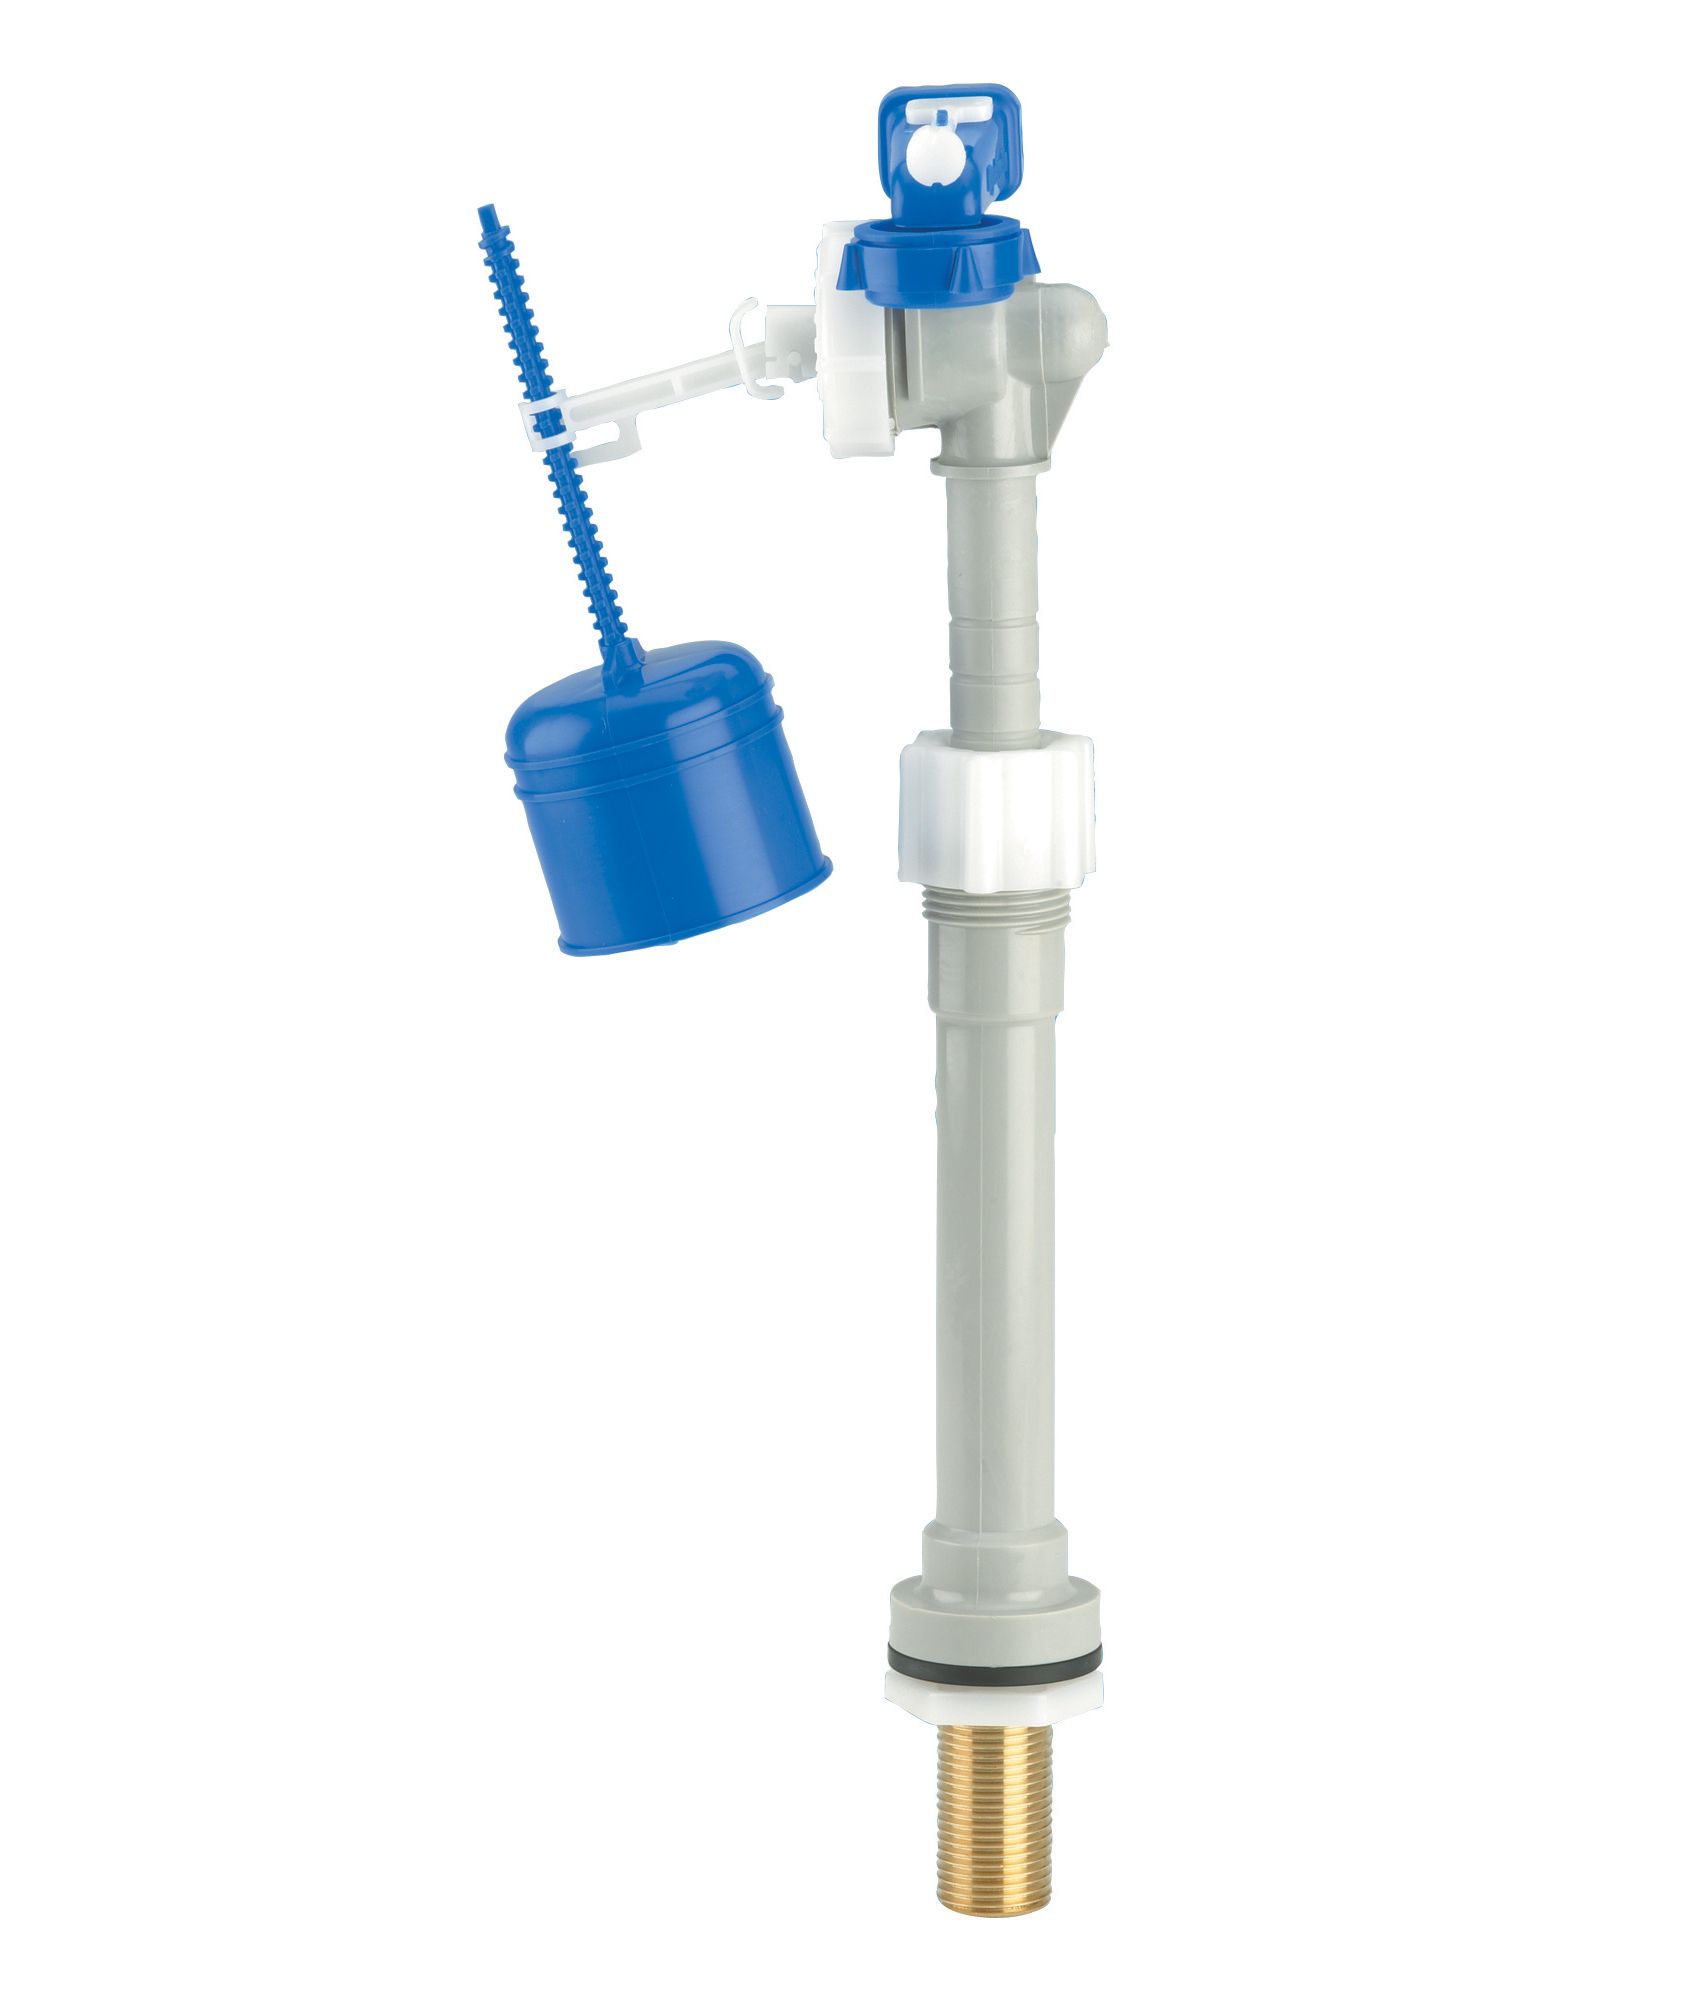 Image of Dudley Adjustable Inlet Valve with Brass Tail